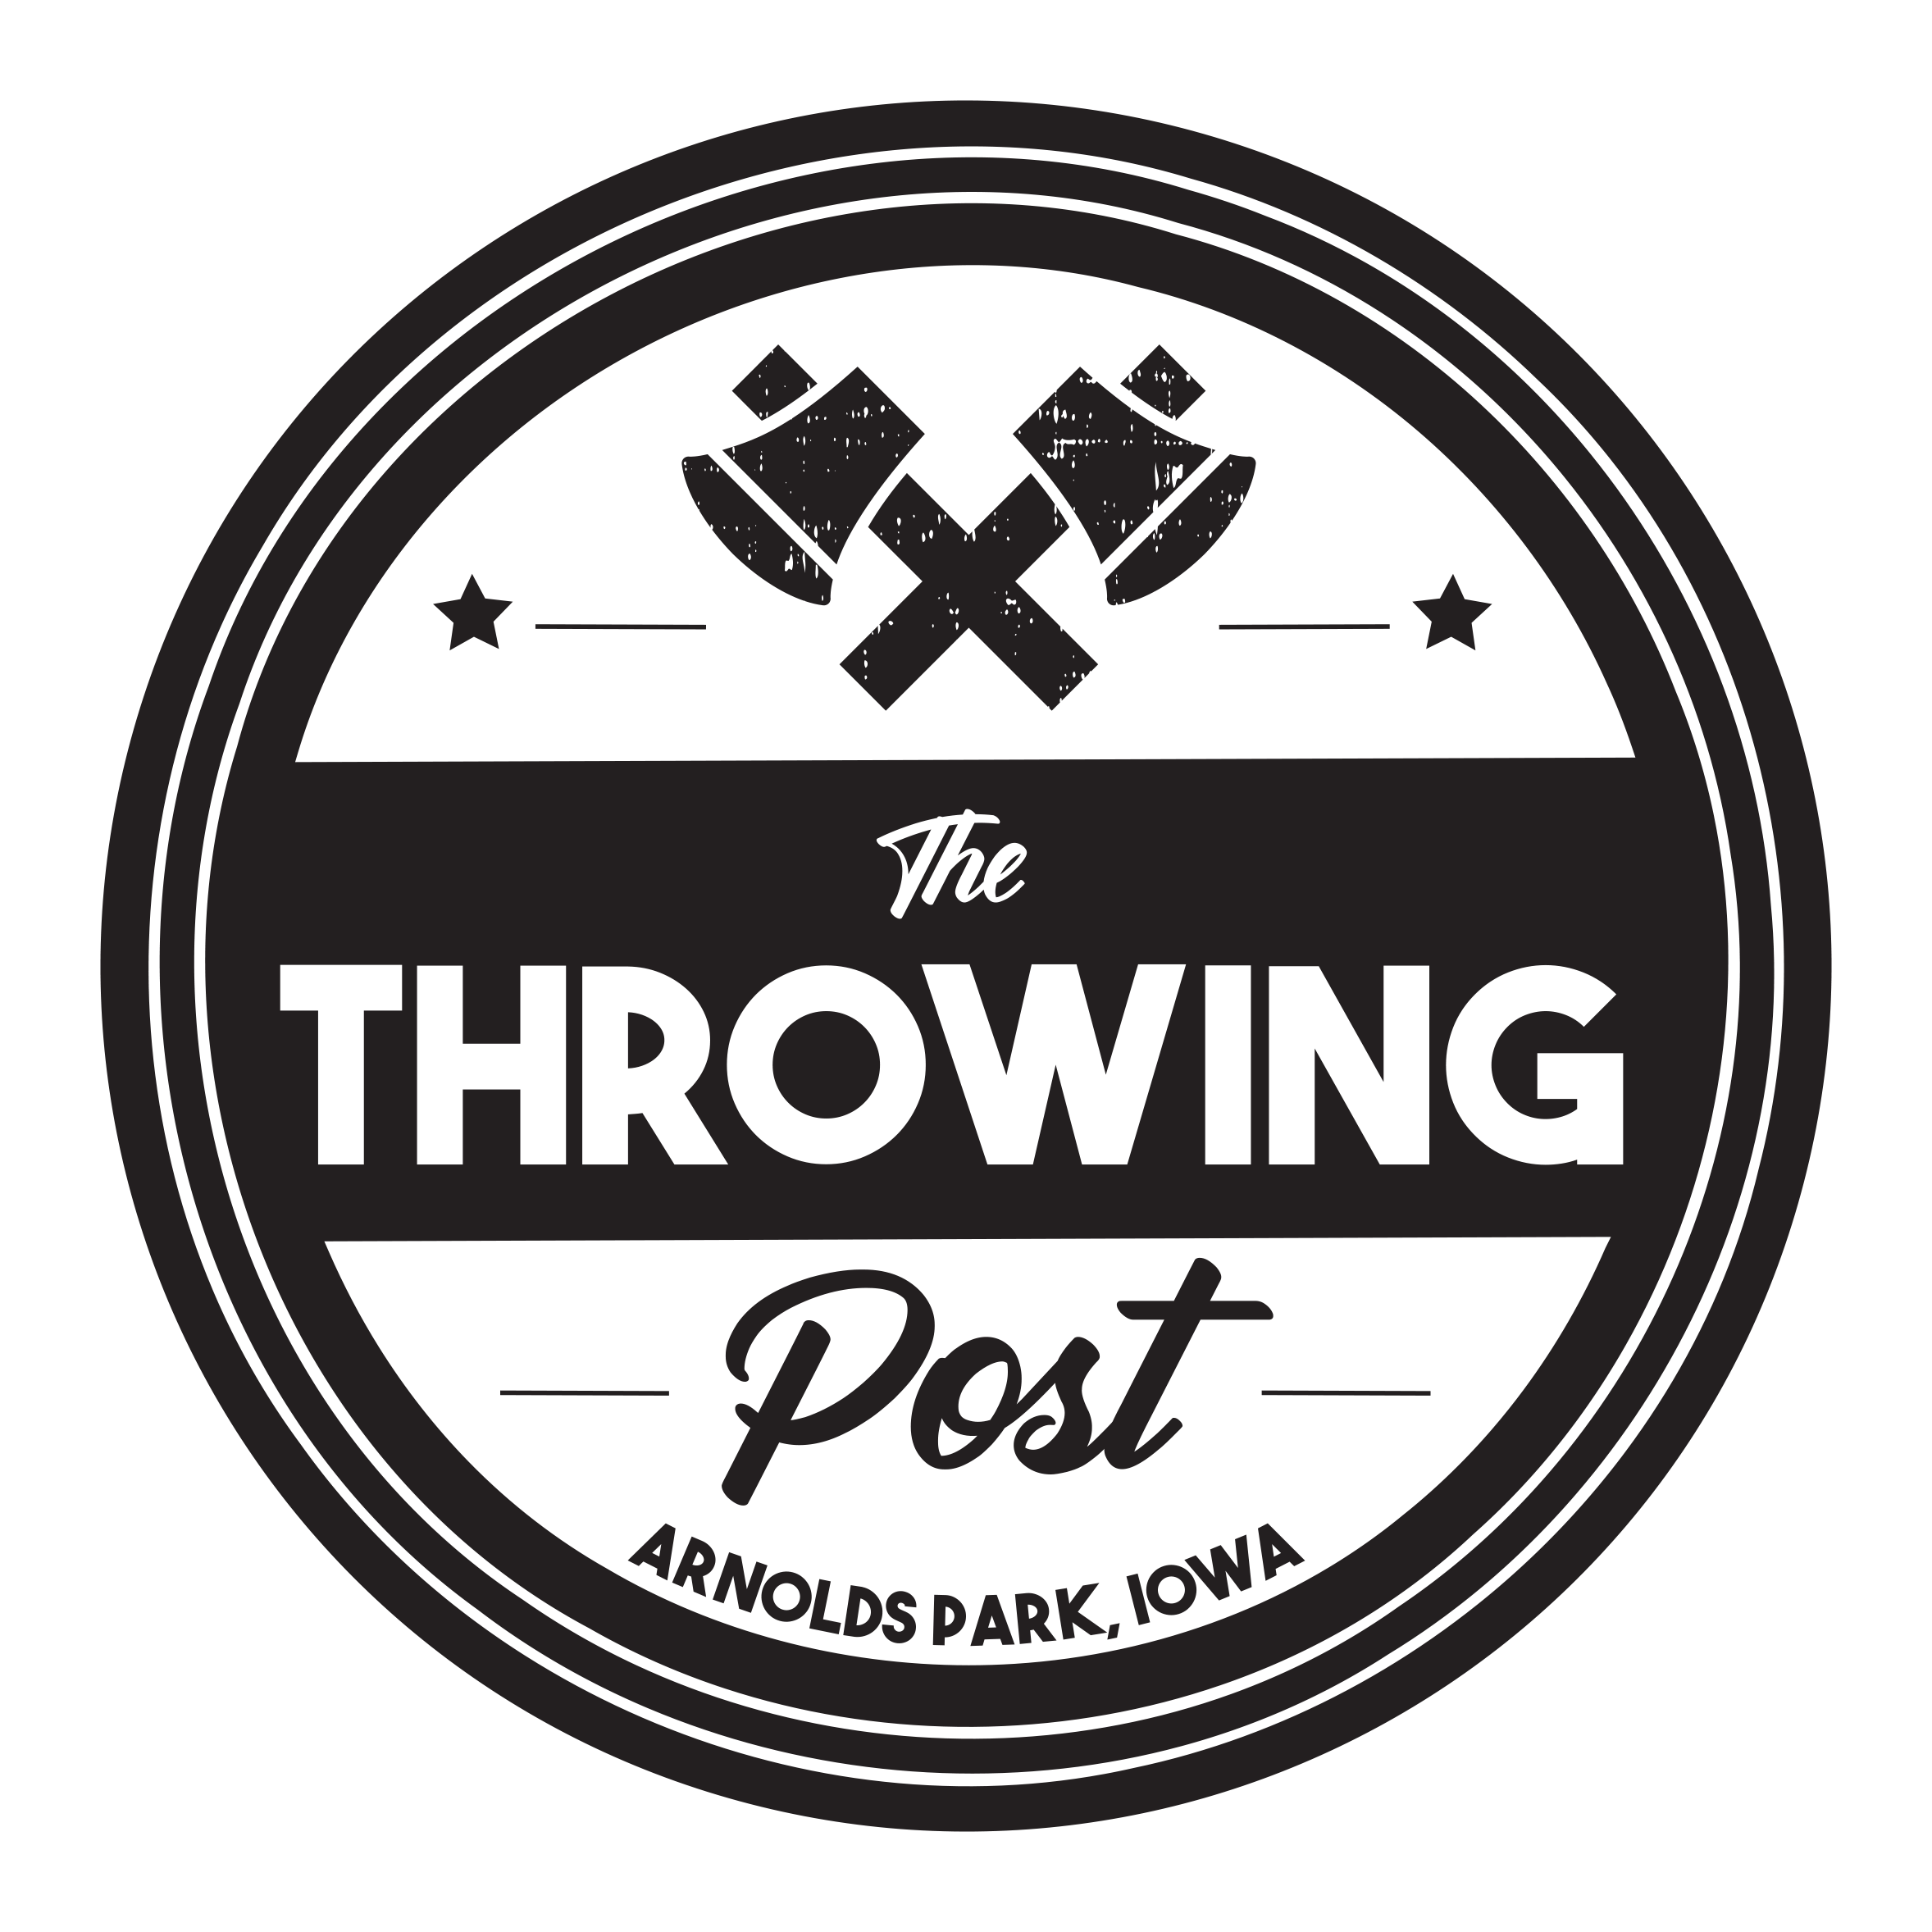 The Throwing Post